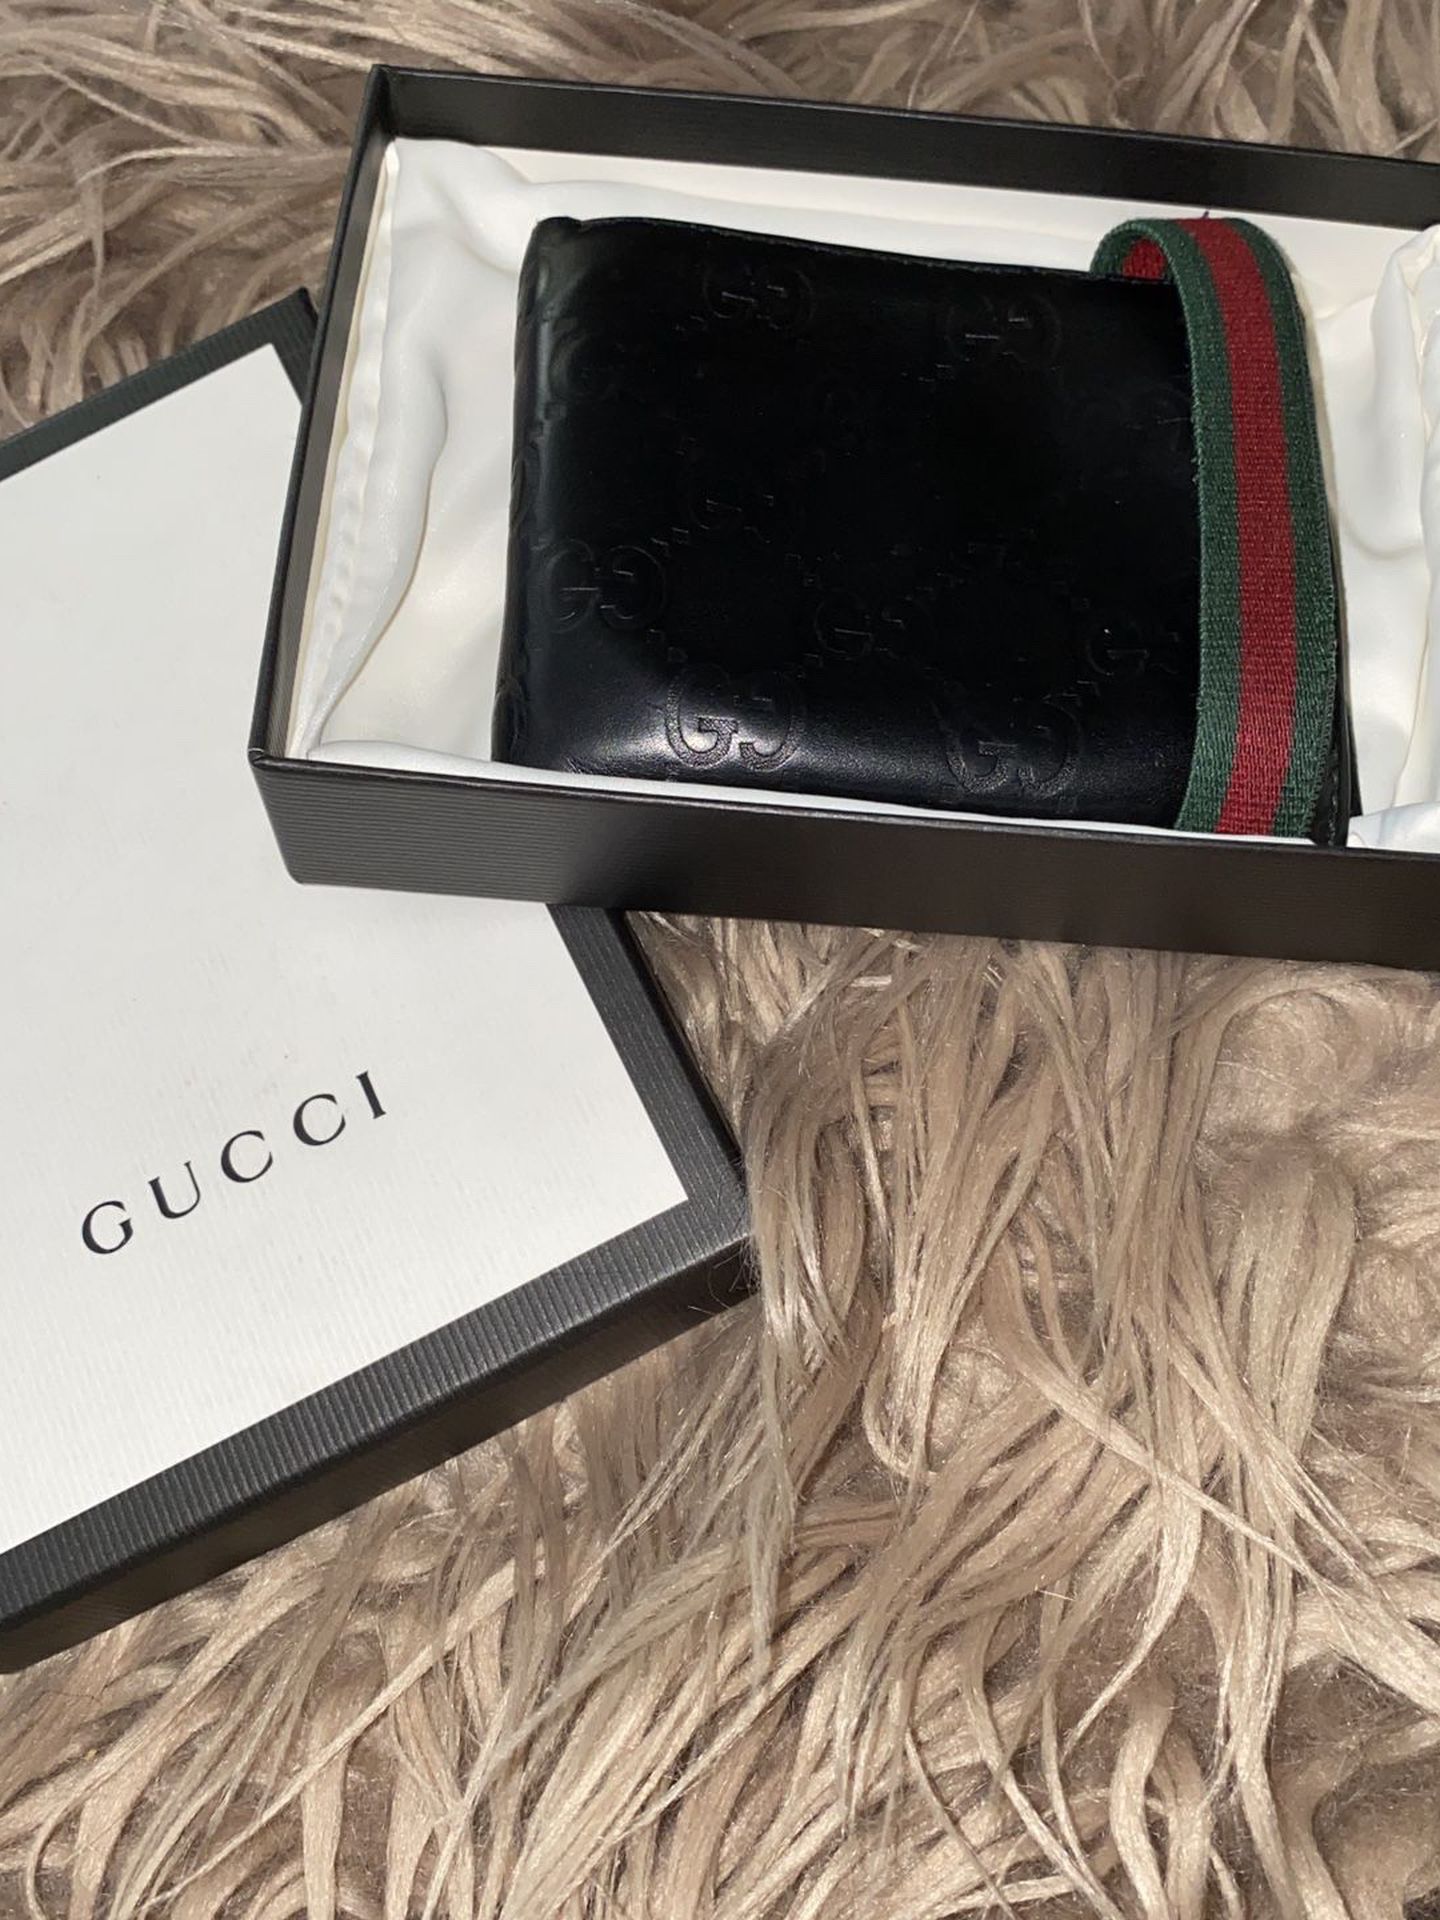 🔴Gucci Mens Leather Wallet Guccissima With Box And Dust Sleeve AUTHENTIC & 1 Keychain NWT RESERVED FOR MARTIN🔴